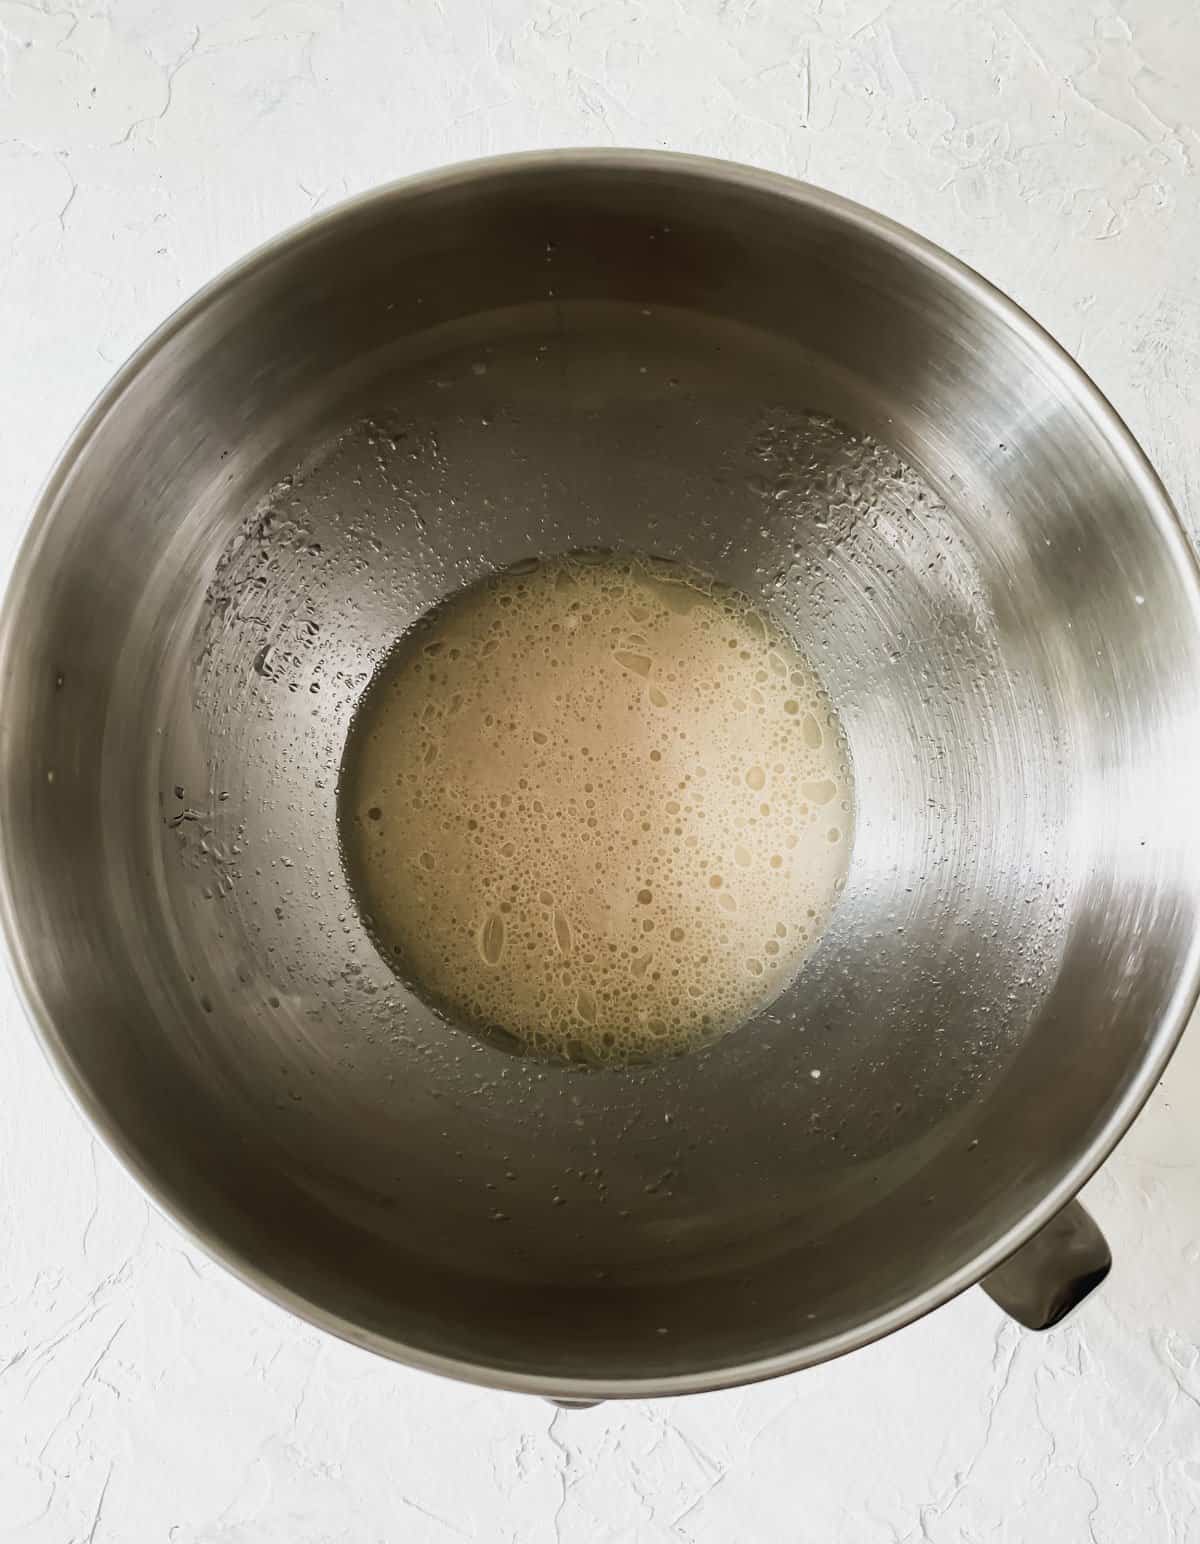 frothy yeast, beer, and water mixture in a mixing bowl